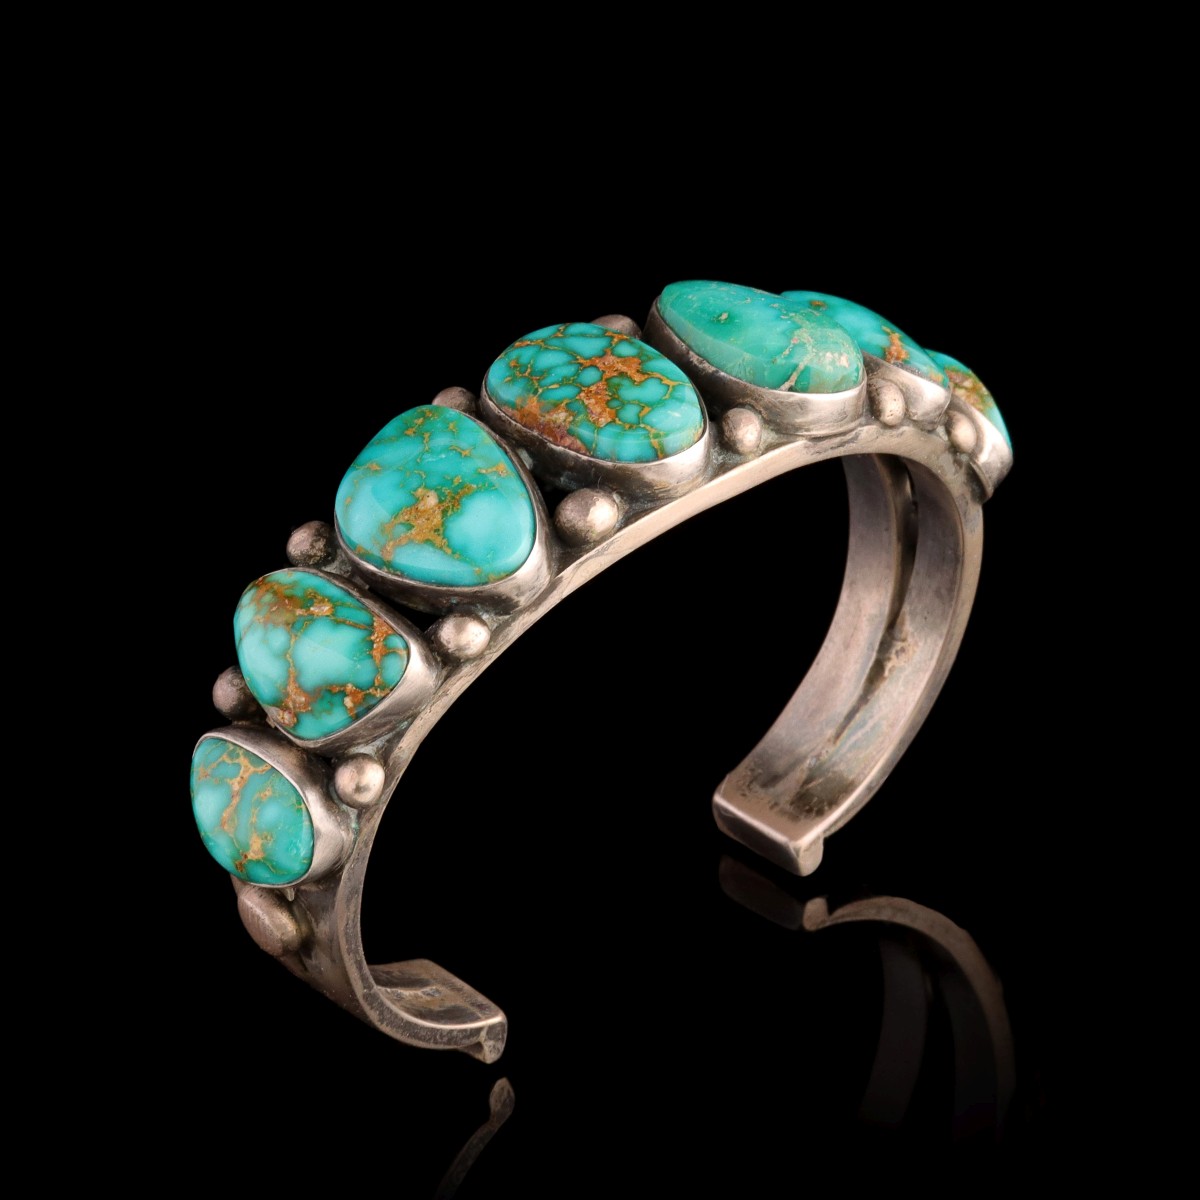 A STERLING SILVER AND TURQUOISE MEN'S CUFF BRACELET